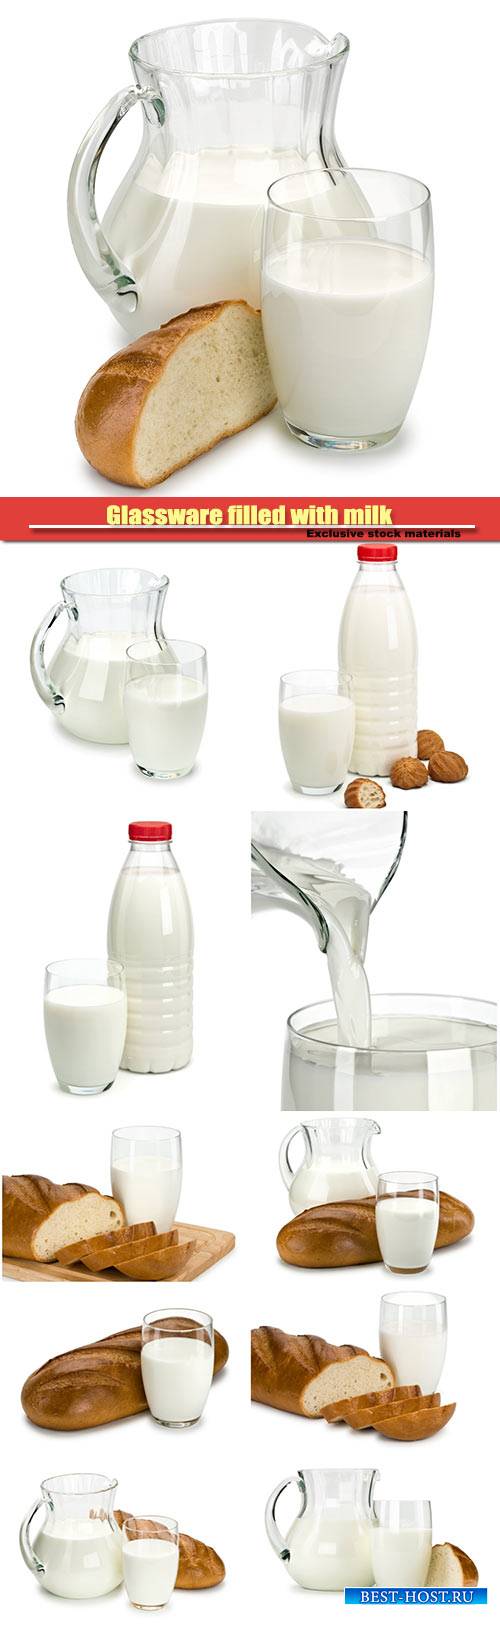 Glassware filled with milk and a white loaf long loaf